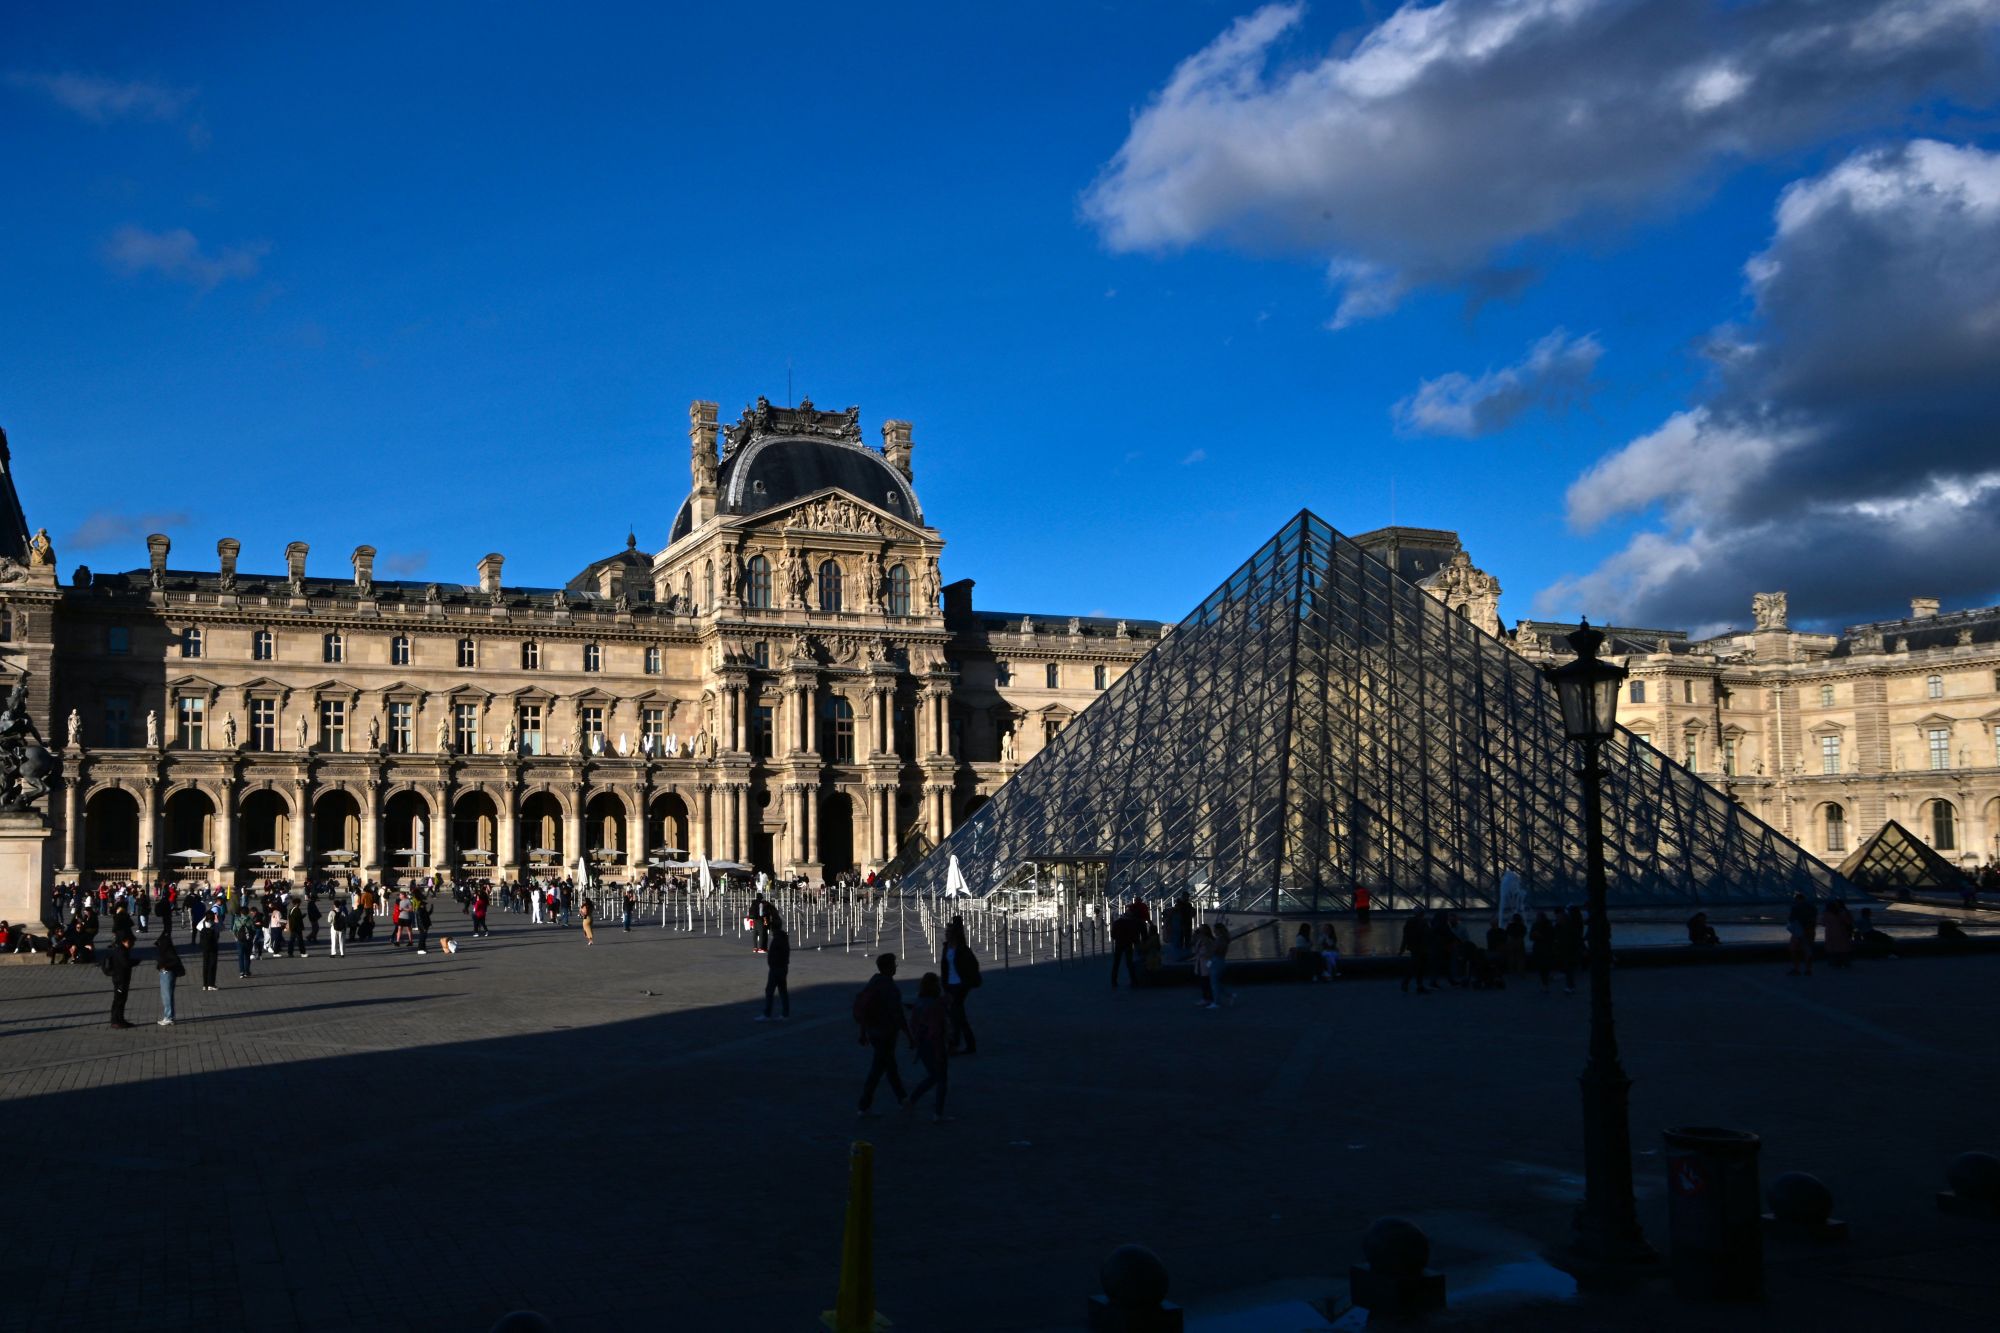 Tourists walk past the Louvre Pyramid, designed by Chinese architect Ieoh Ming Pei at the Louvre museum in central Paris on September 21, 2023. (Photo by MIGUEL MEDINA / AFP) / RESTRICTED TO EDITORIAL USE - MANDATORY MENTION OF THE ARTIST UPON PUBLICATION - TO ILLUSTRATE THE EVENT AS SPECIFIED IN THE CAPTION (Photo by MIGUEL MEDINA/AFP via Getty Images)